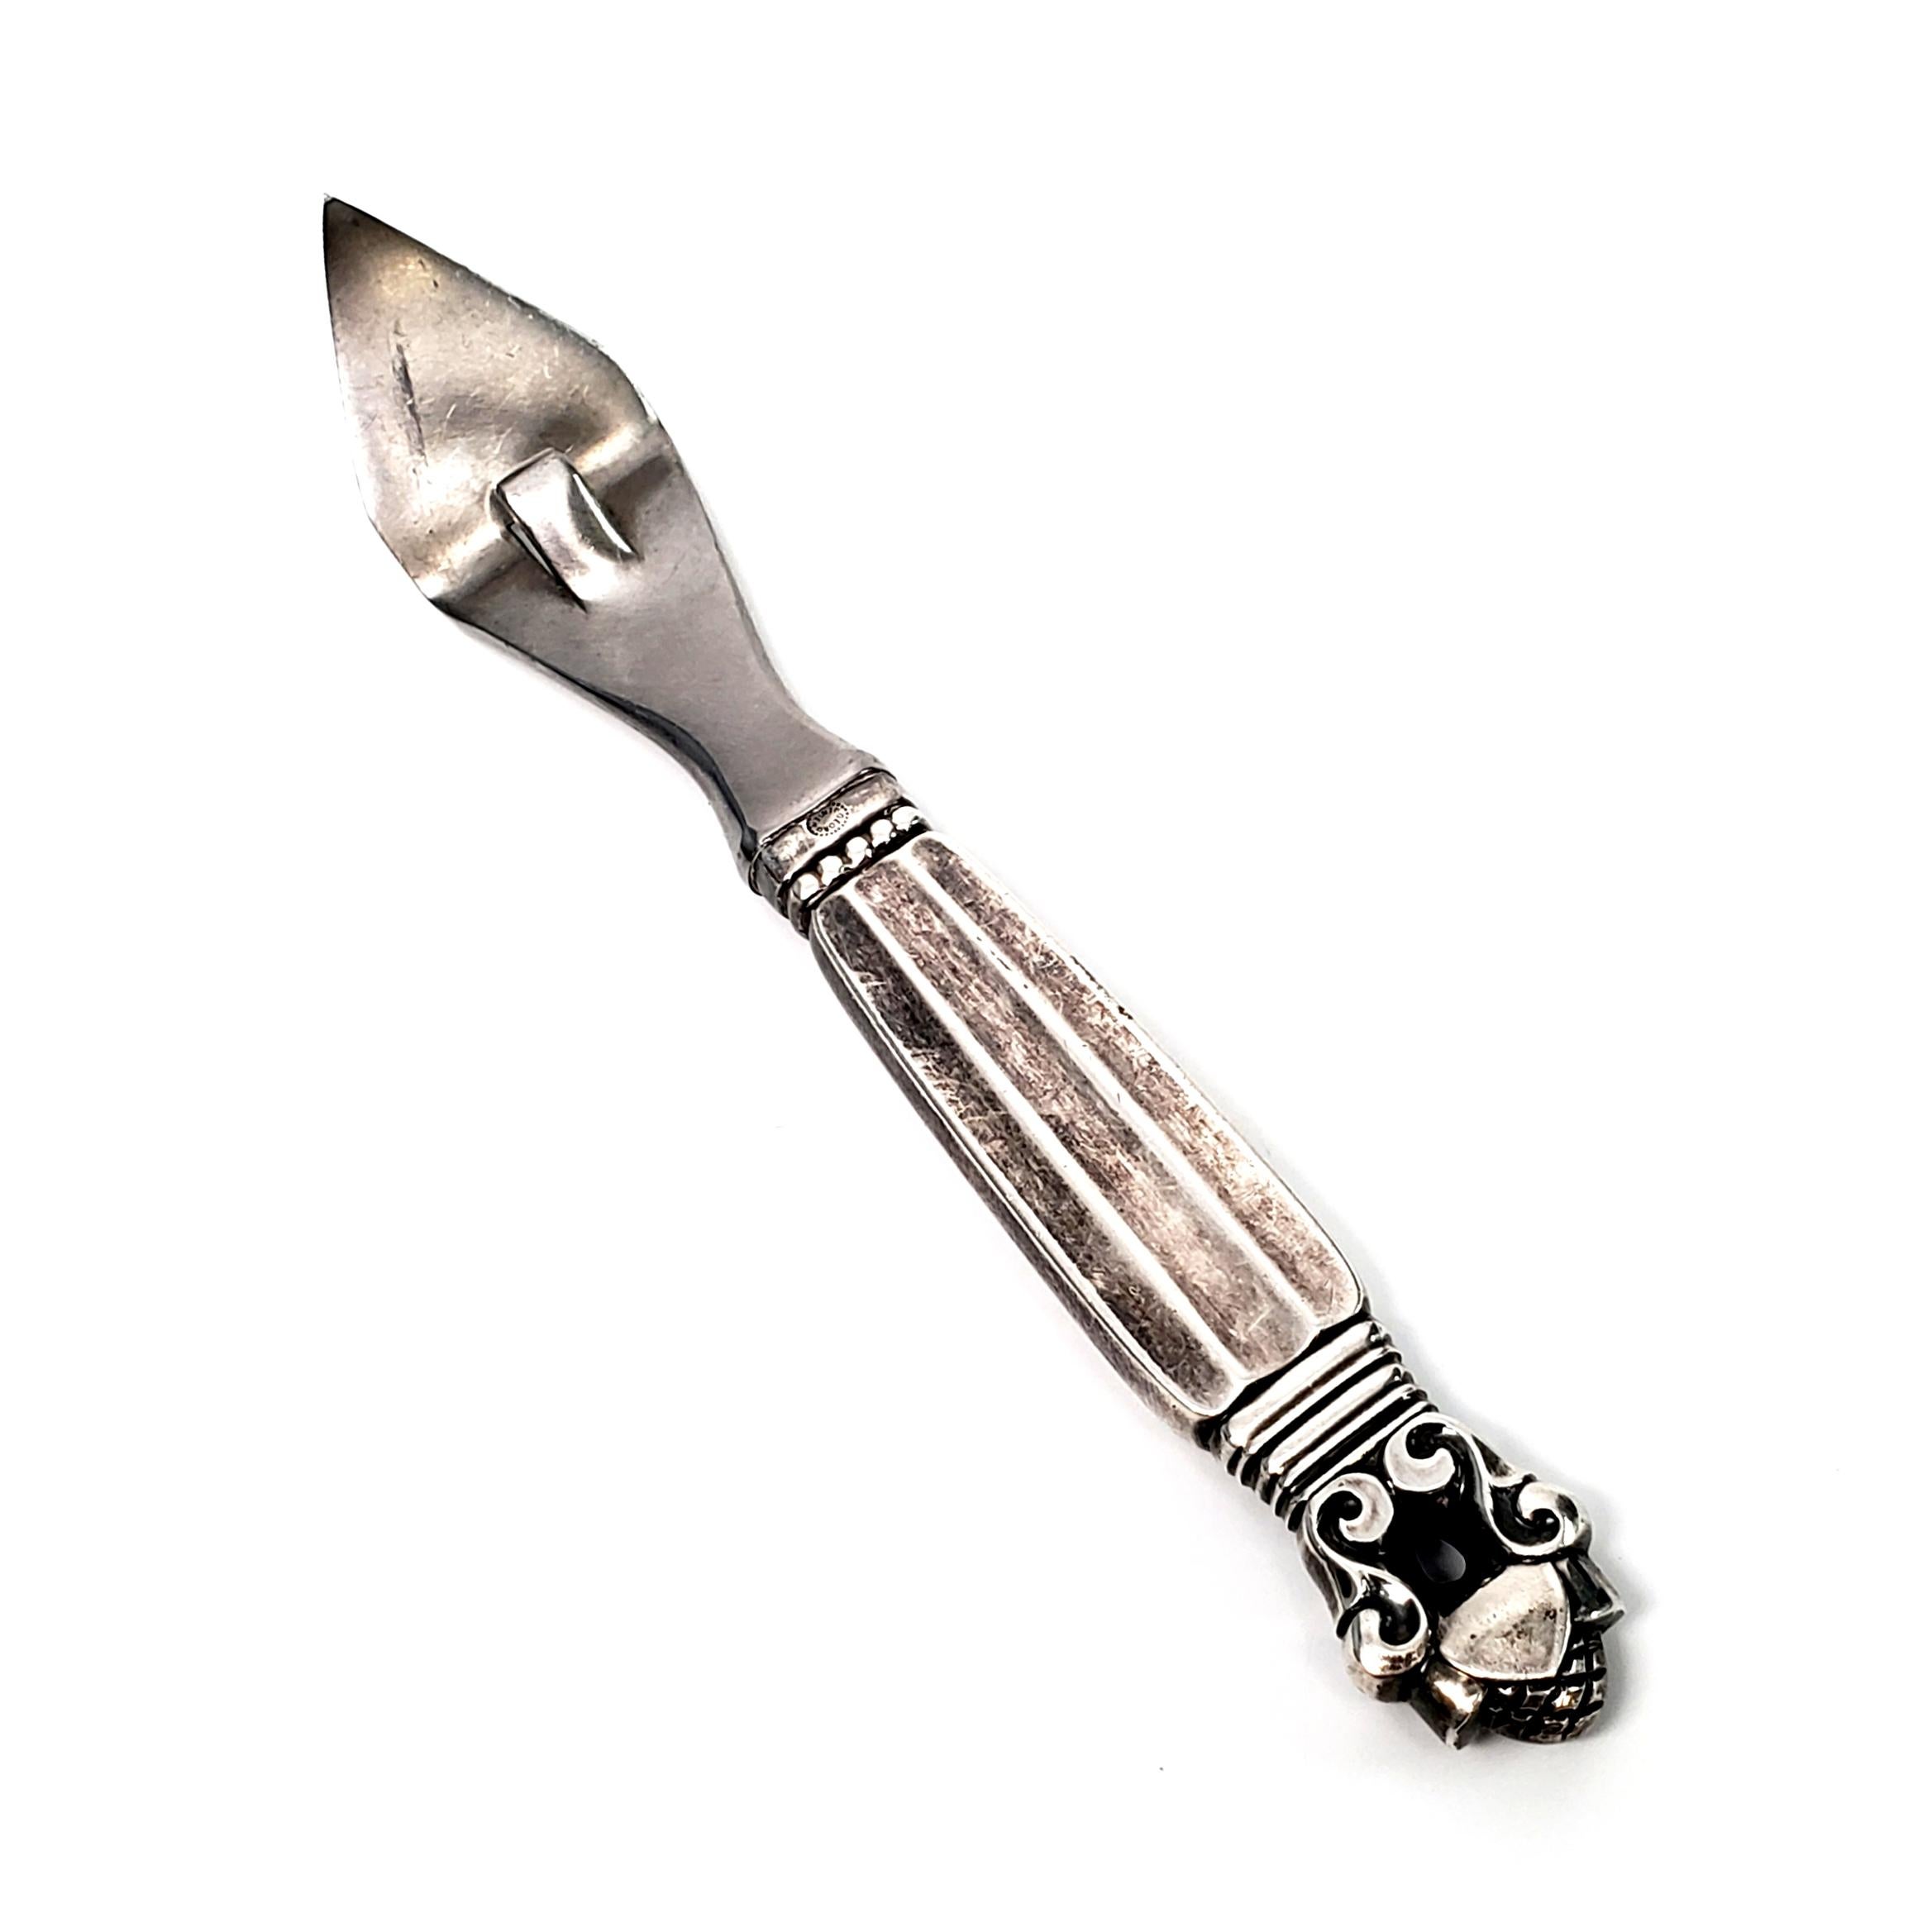 Sterling silver handle can opener with stainless implement from Georg Jensen in the Acorn pattern.

The Acorn pattern was introduced in 1915 as a collaboration between Georg Jensen and designer Johan Ronde. The Acorn pattern, which combines Art